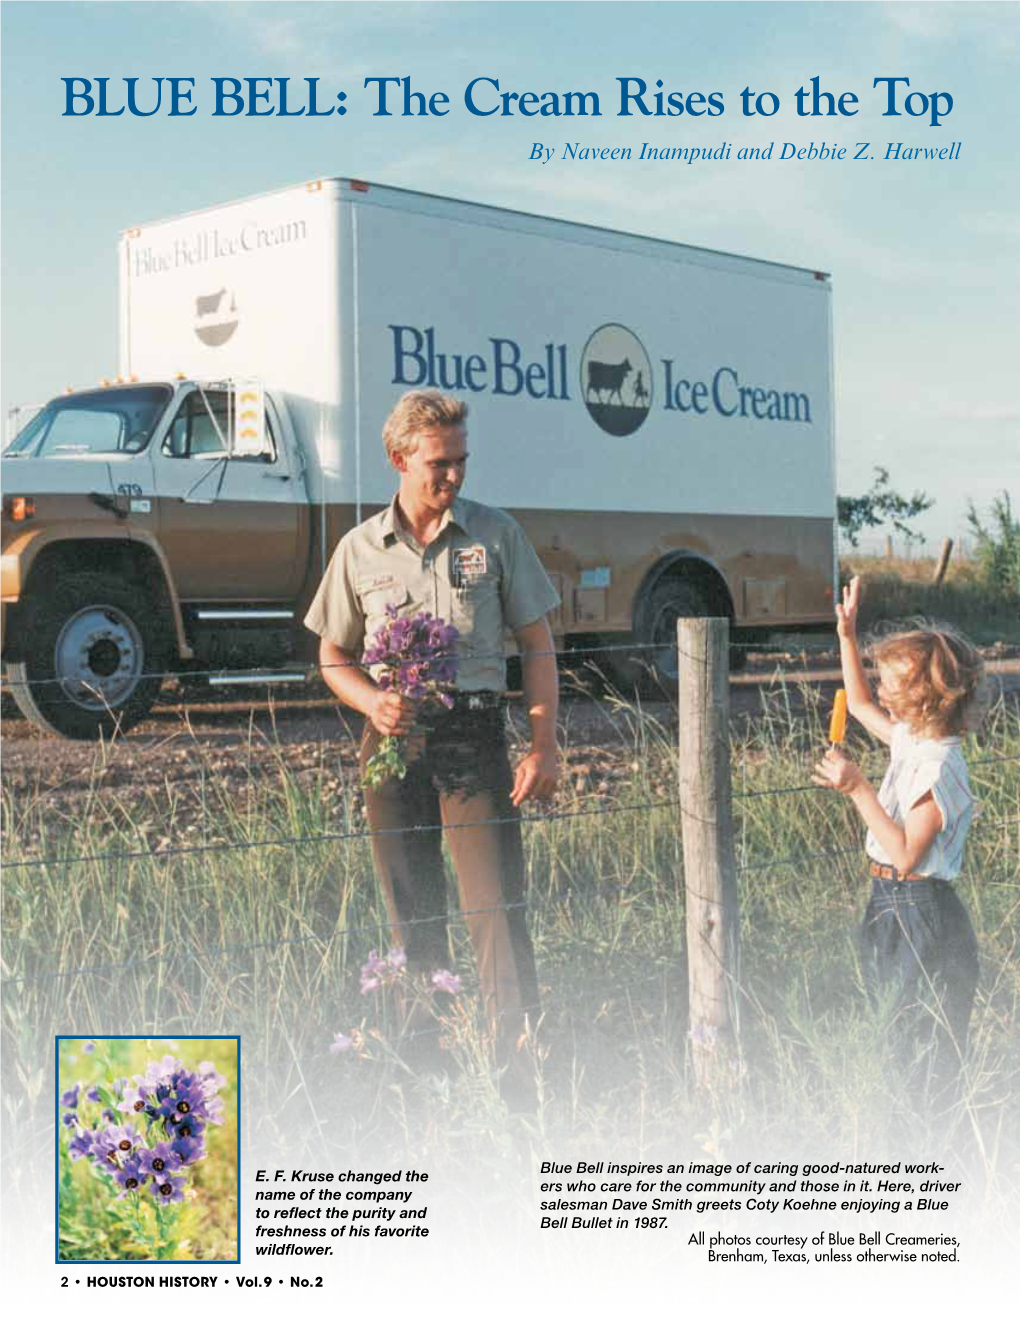 BLUE BELL: the Cream Rises to the Top by Naveen Inampudi and Debbie Z